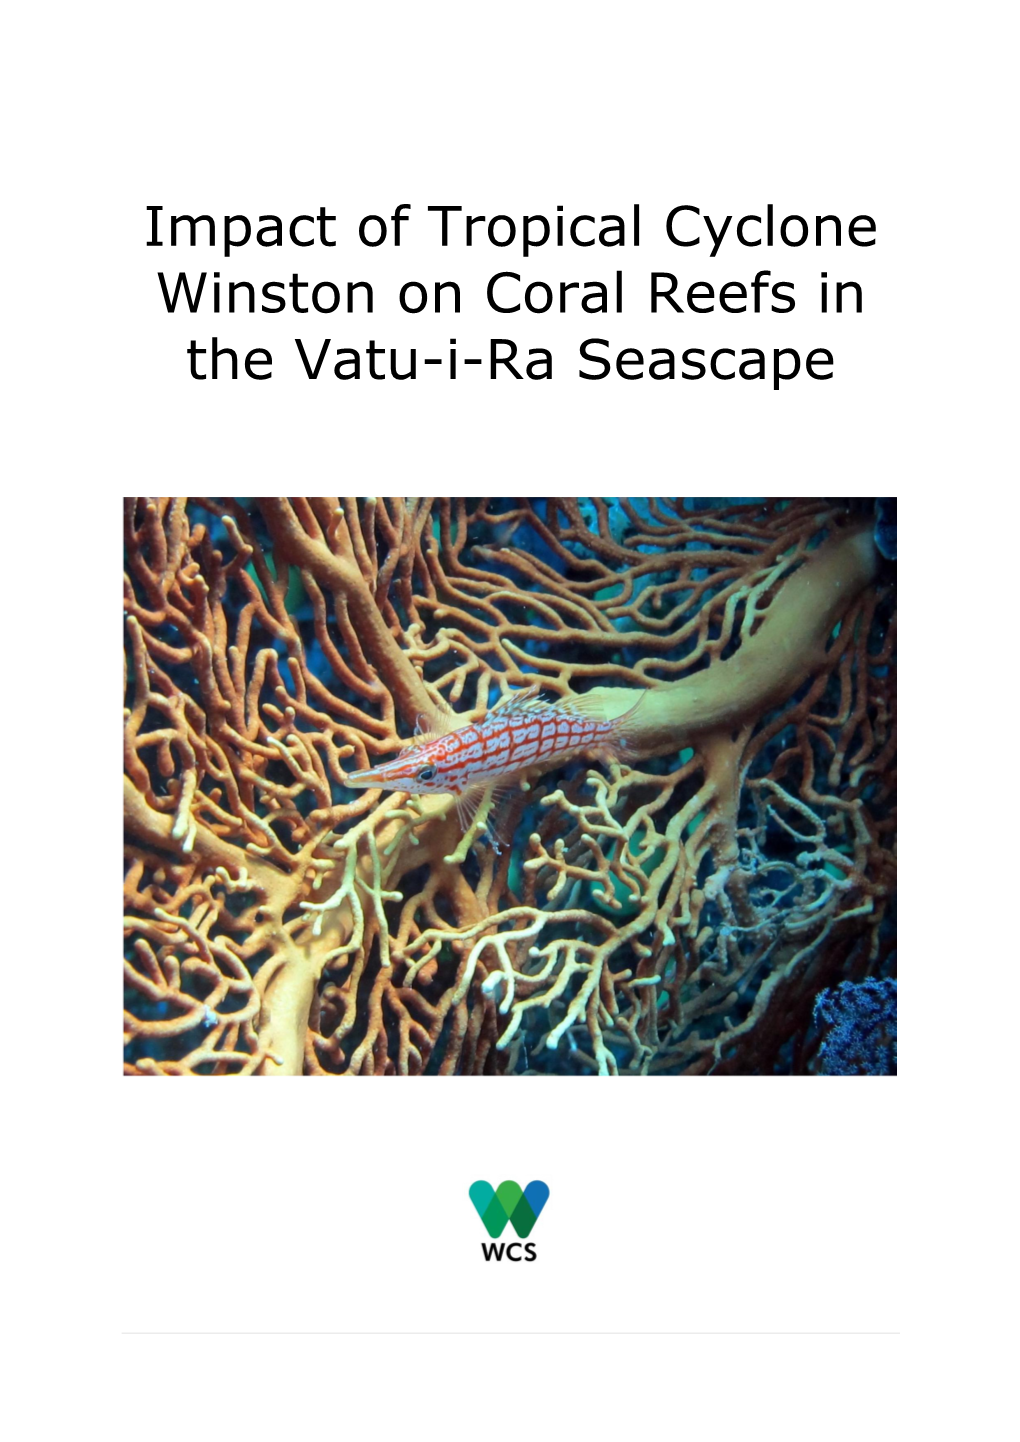 Impact of Tropical Cyclone Winston on Coral Reefs in the Vatu-I-Ra Seascape